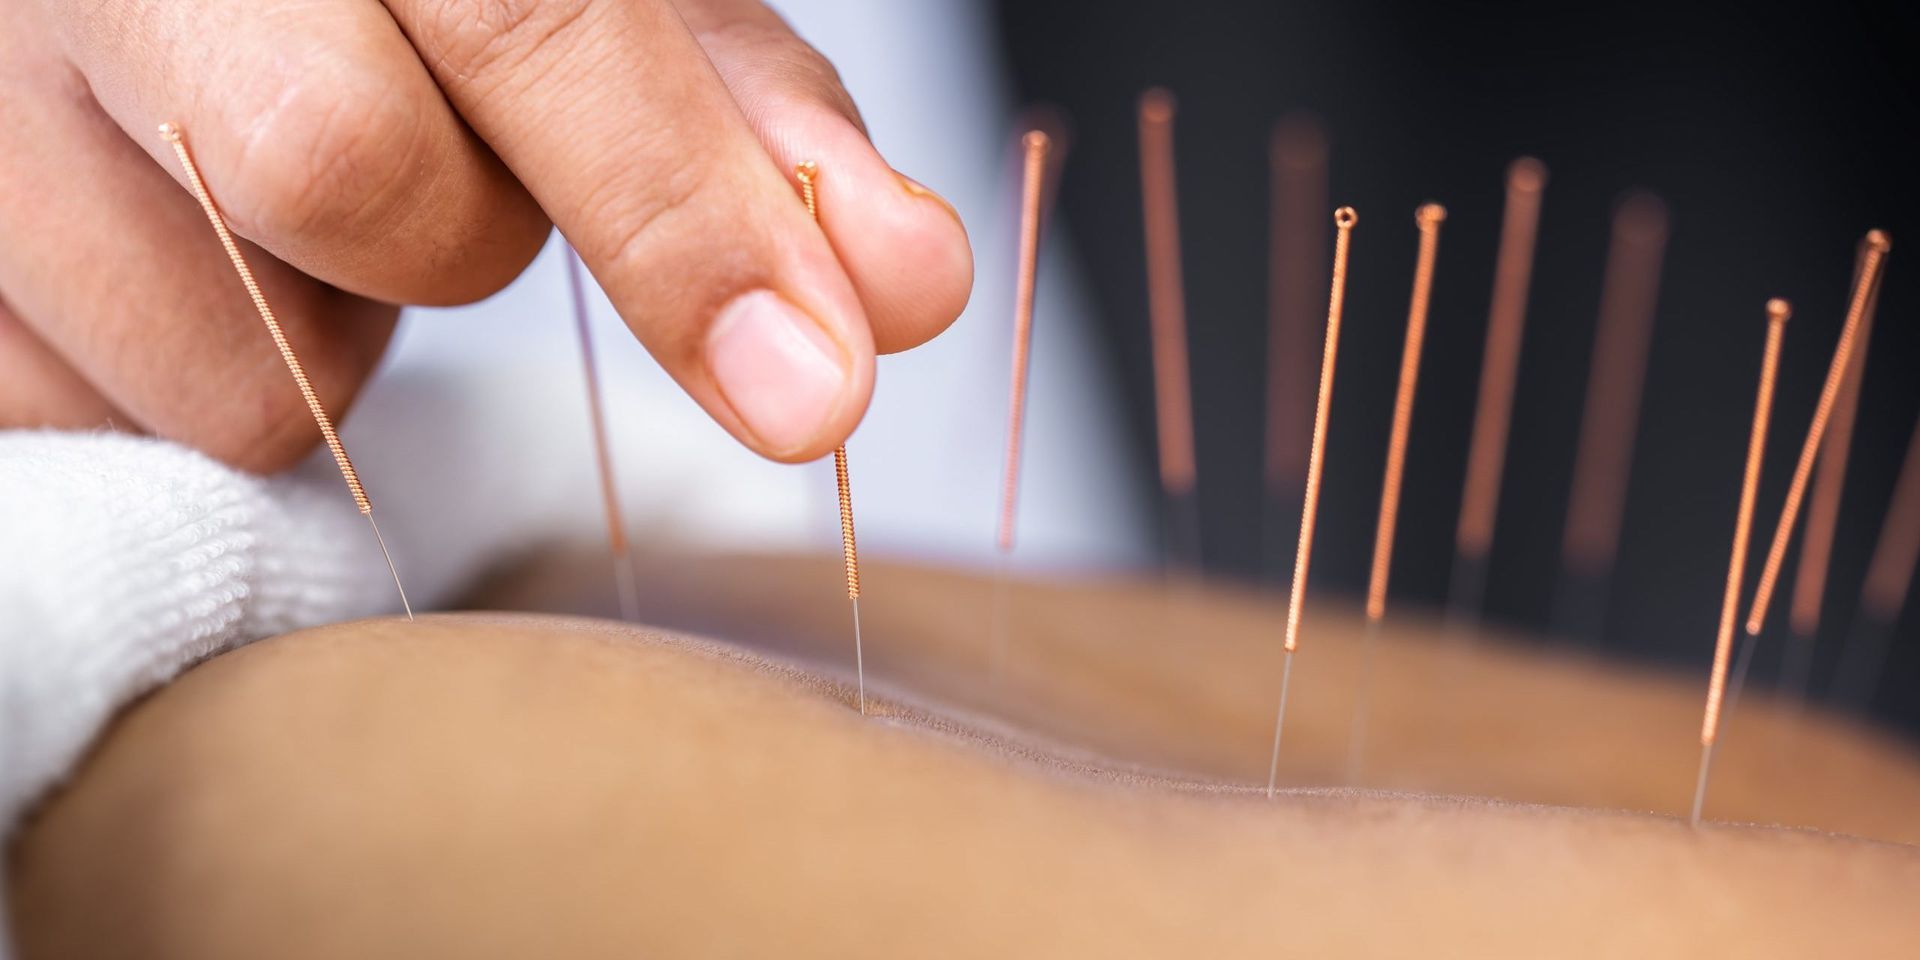 Acupuncture on their back to relieve pain. 